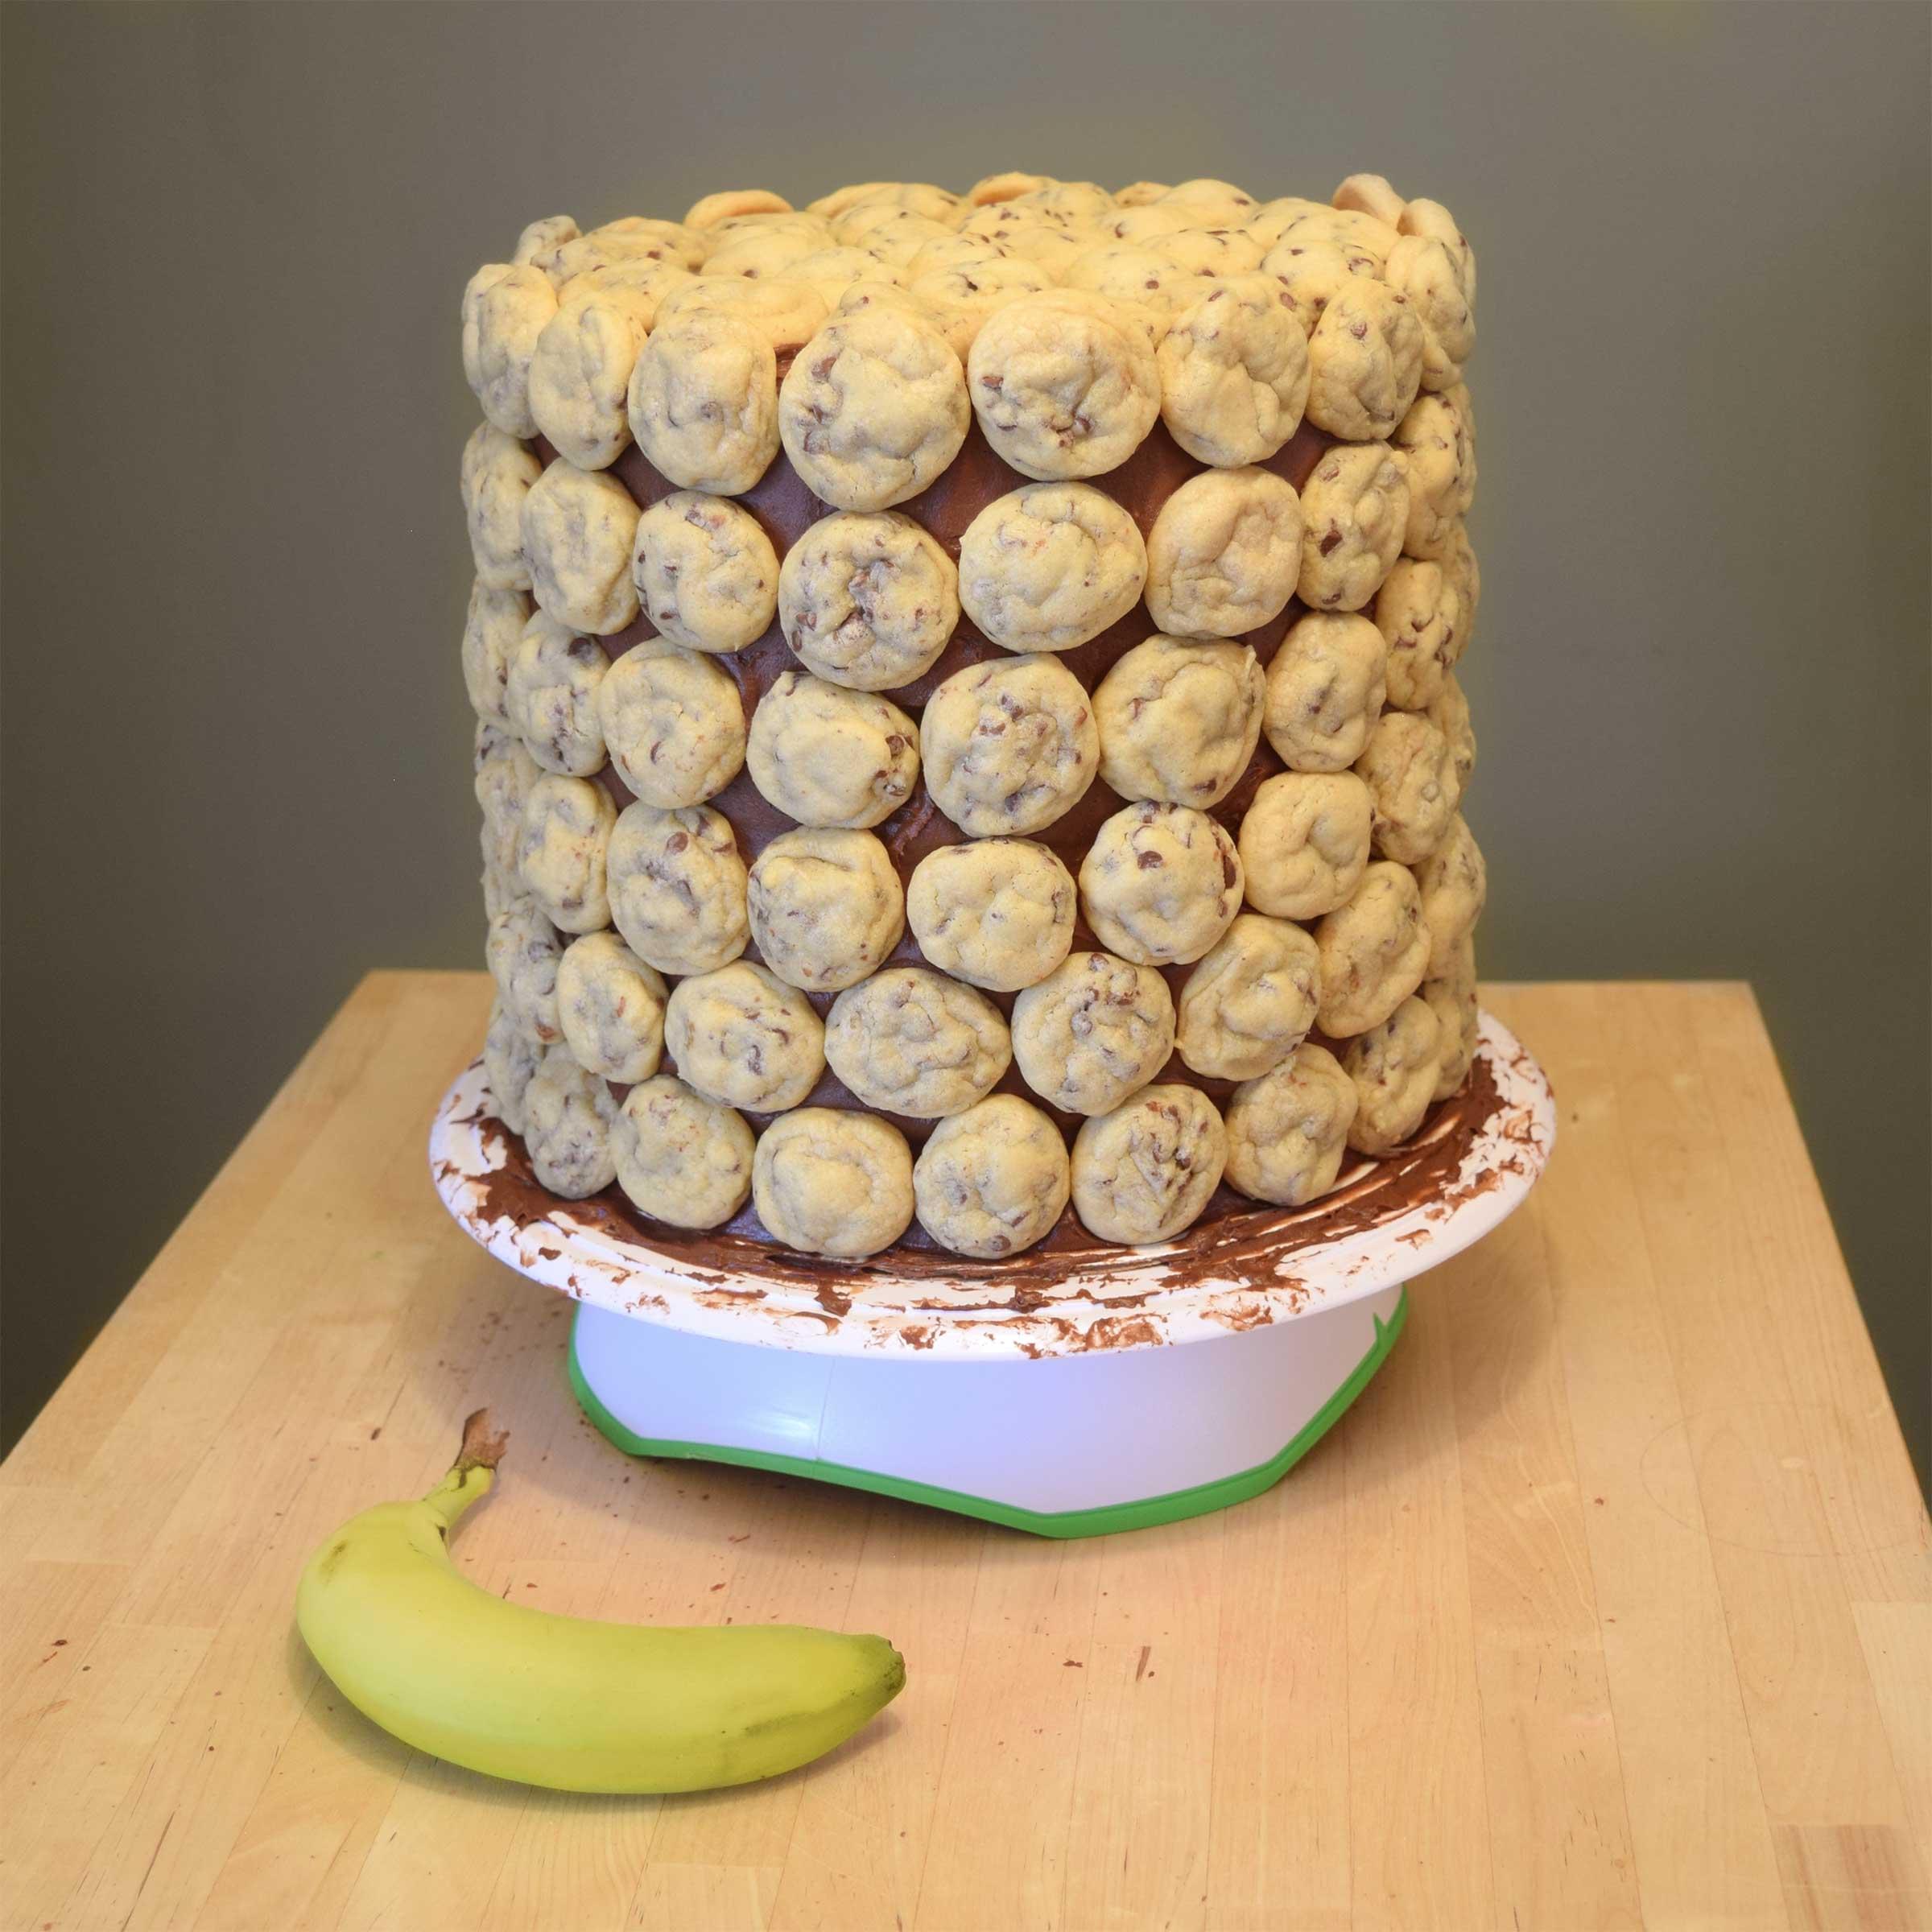 Completed cookie cake, shown with a banana for scale